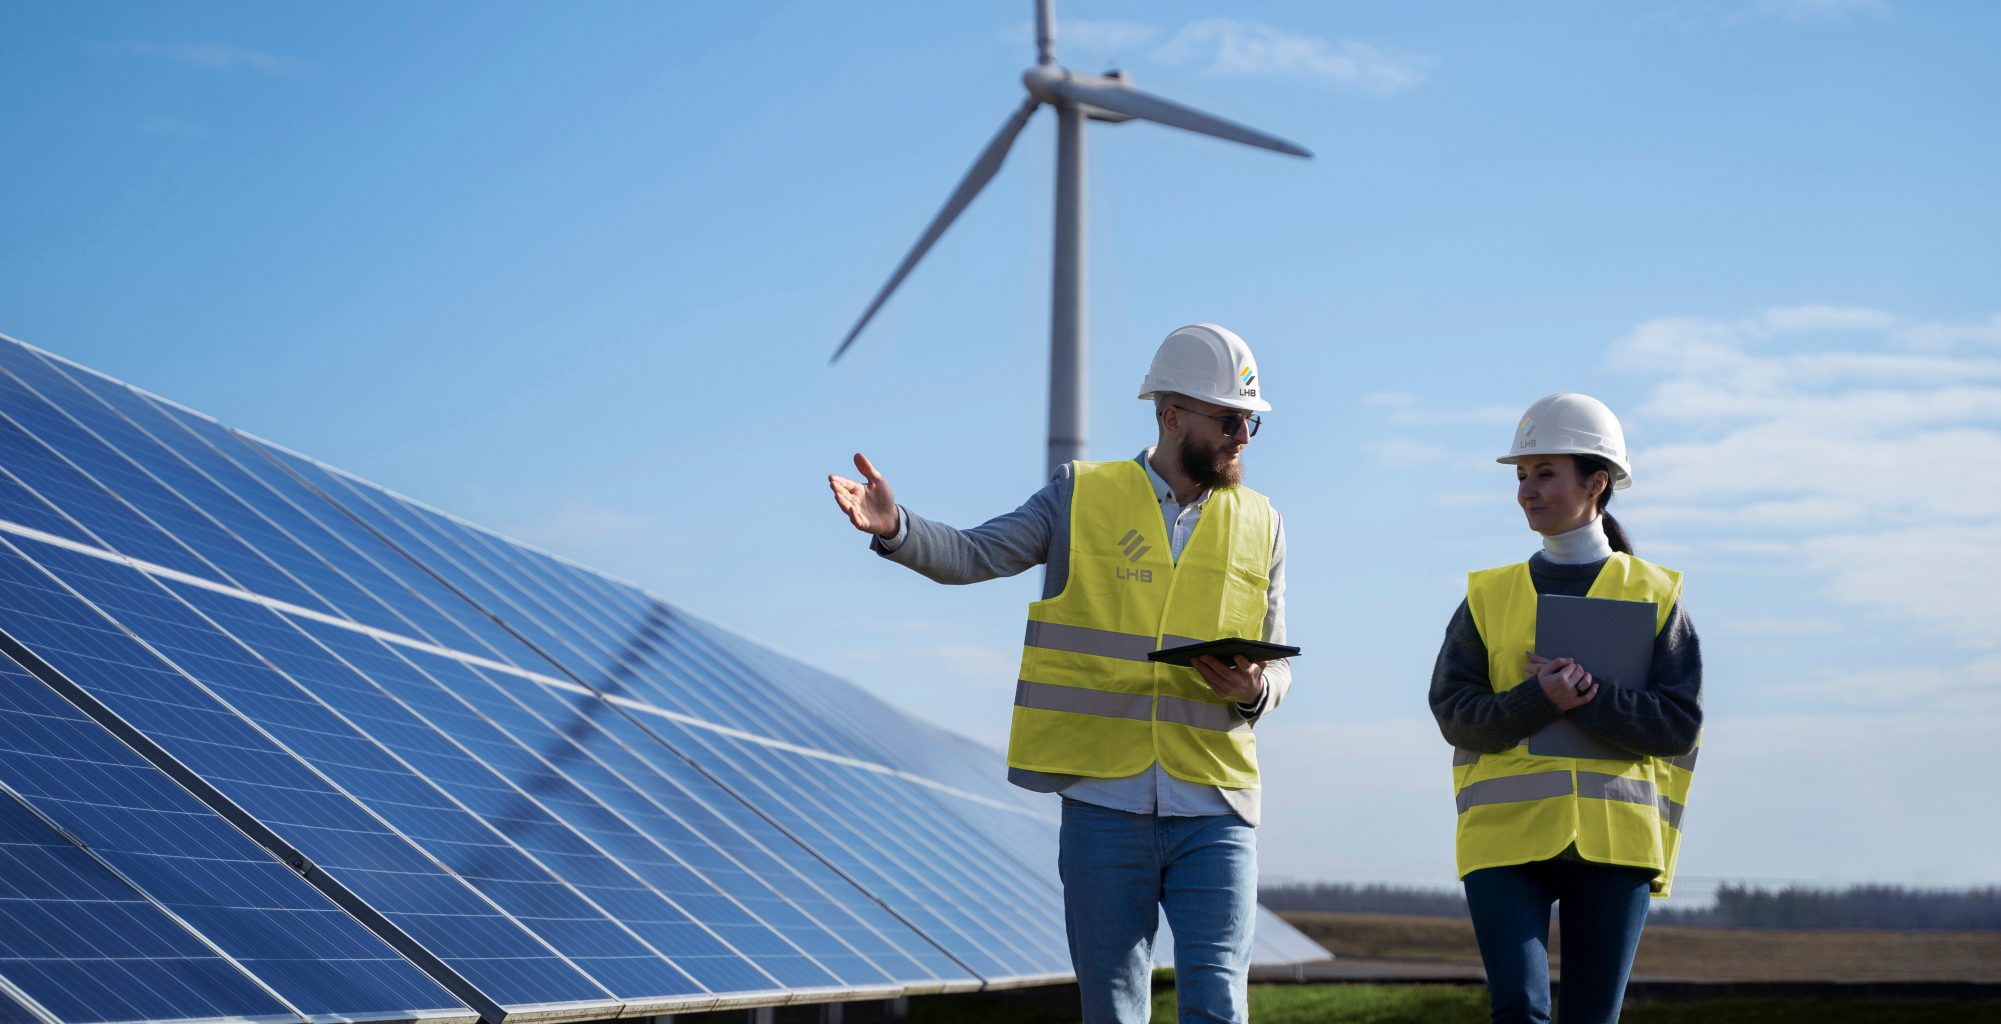 Workers in yellow vests near a solar panel under a wind turbine on a sunny day